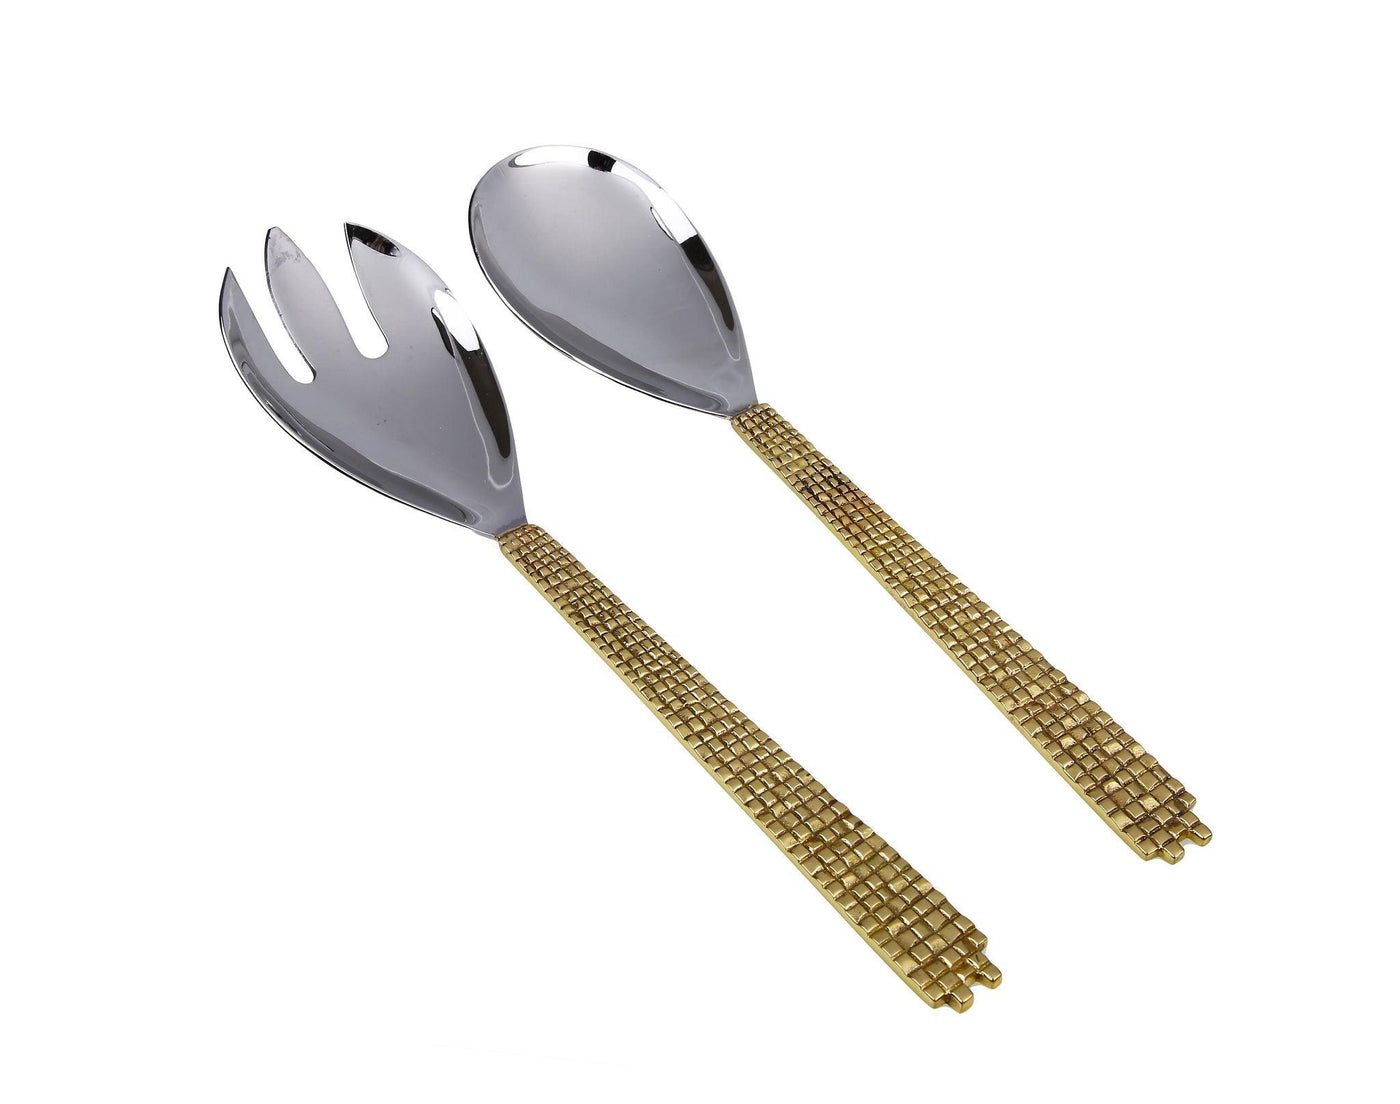 Set of 2 Salad Servers with Mosaic Design - 12"L - Set With Style